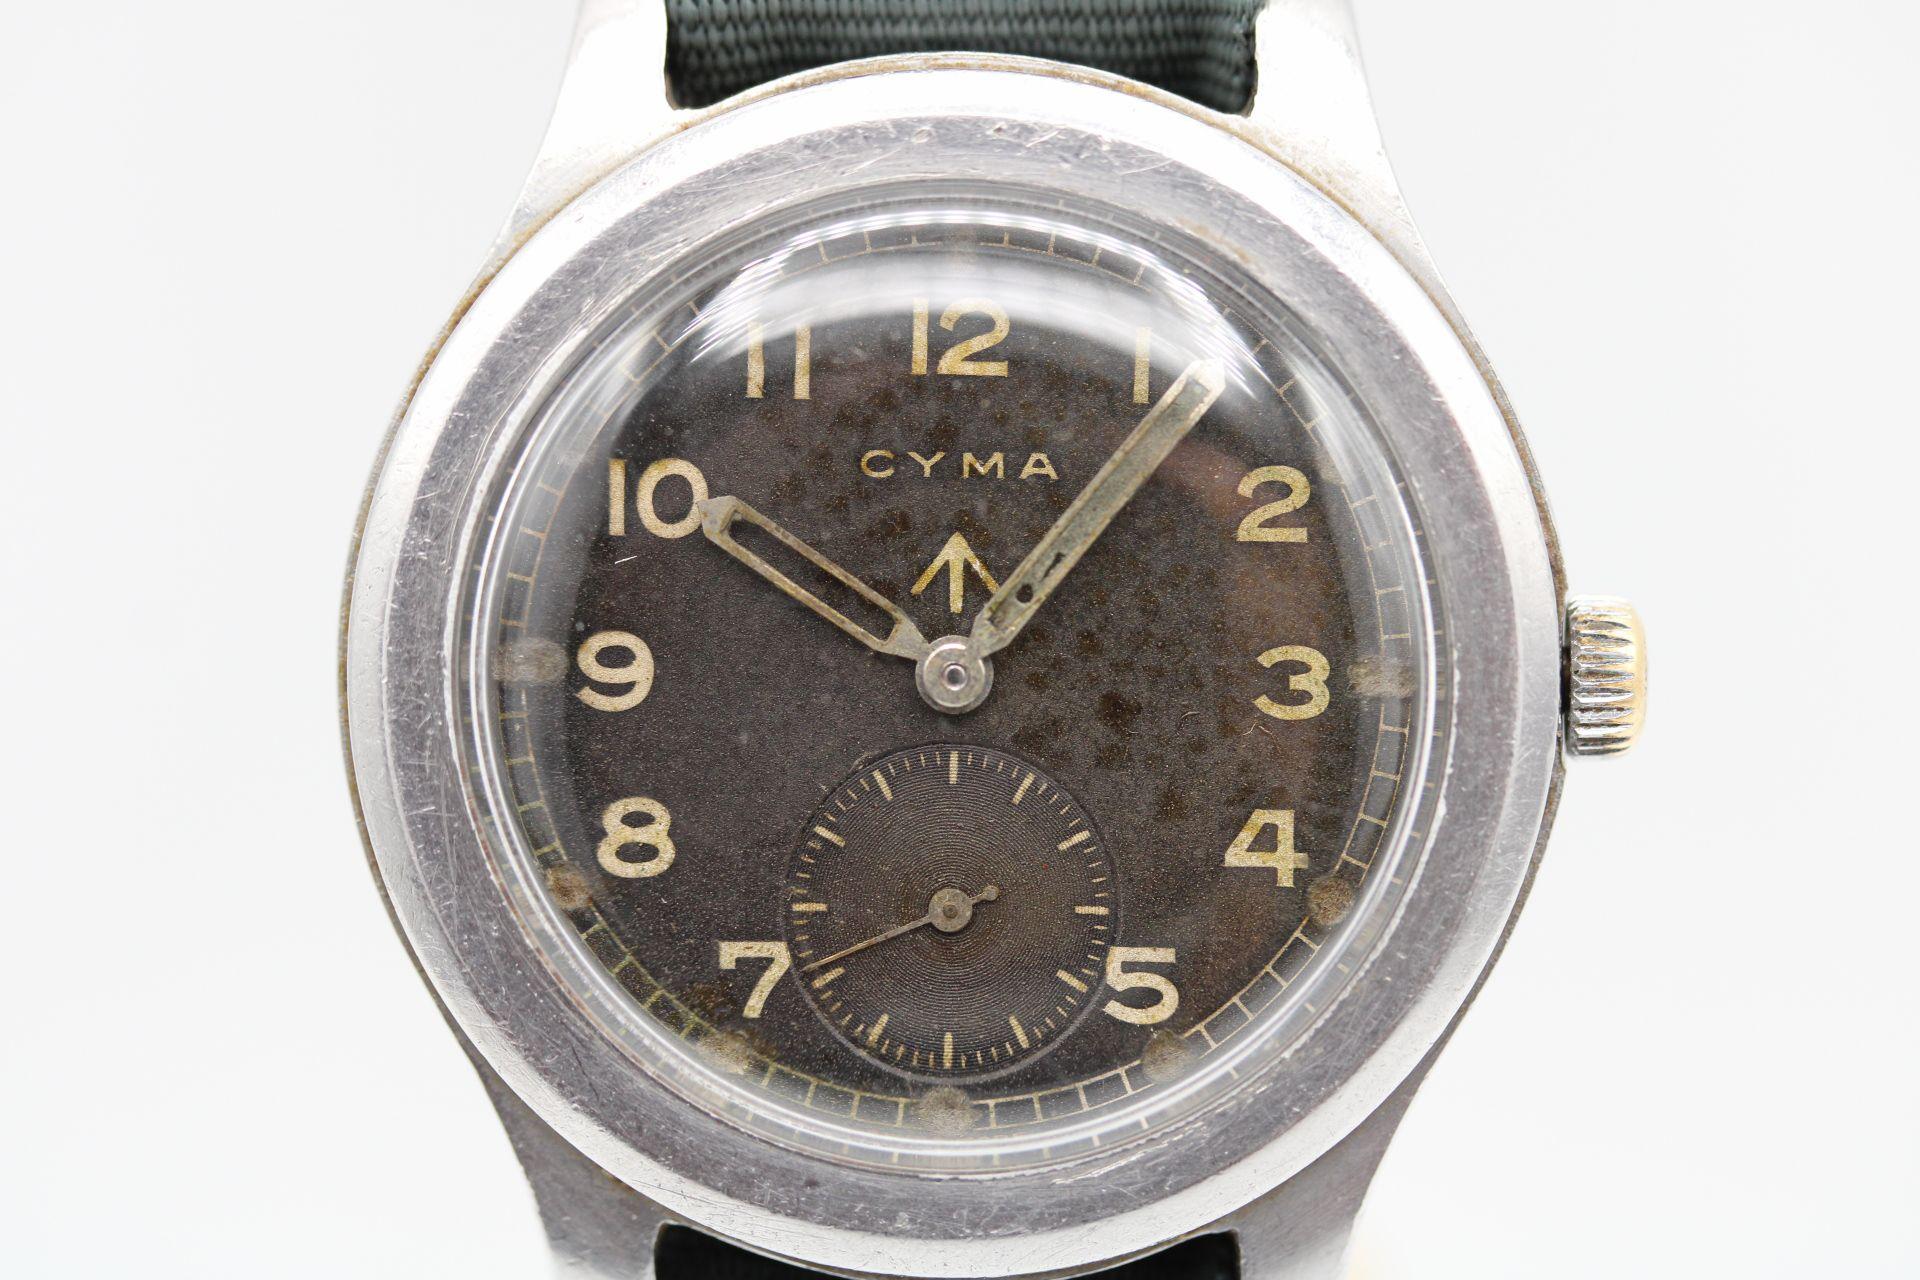 An original Cyma from the 1940's that was later part of the so called 'Dirty Dozen' collection of British Military watches from World War 2.  Admittedly not the rarest of them but a part of the collection nether the less. 

This particular Cyma is a